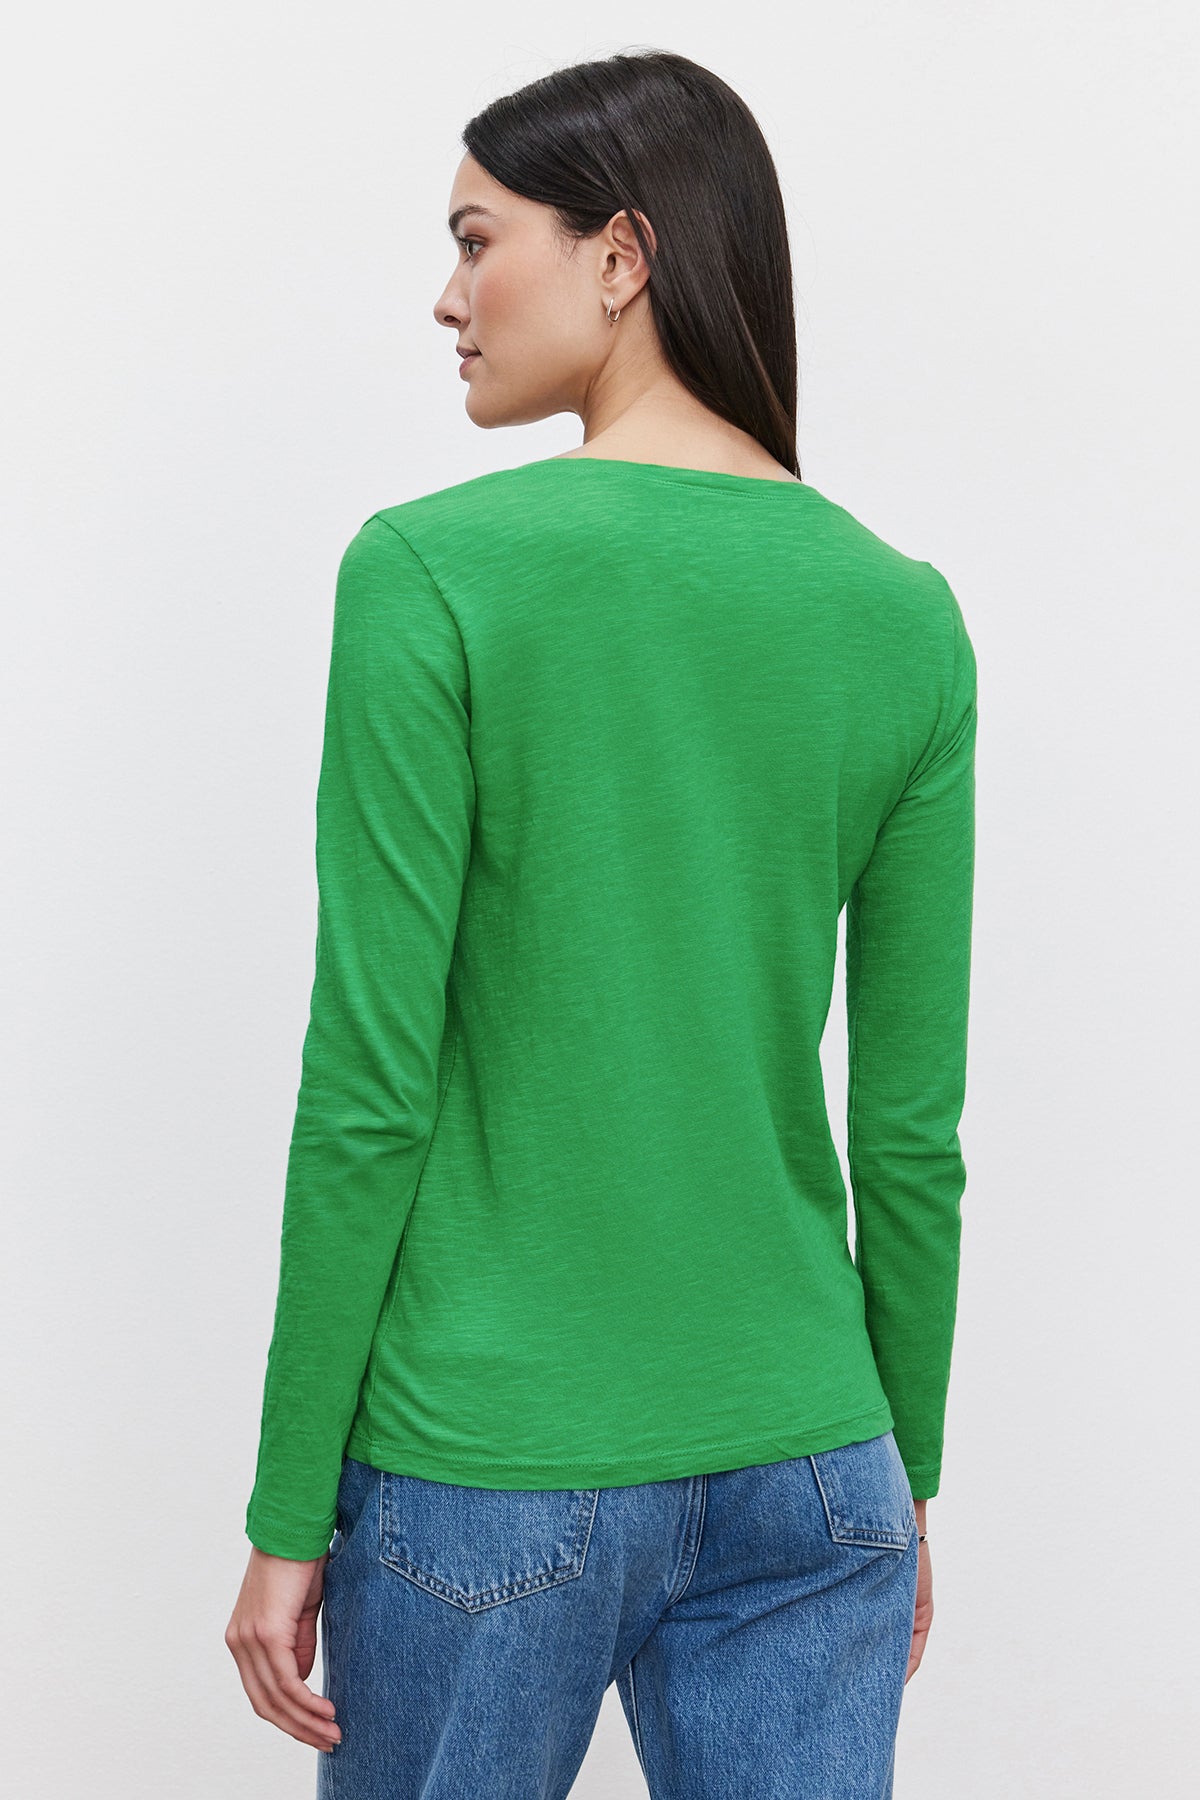 The back view of a woman wearing a Velvet by Graham & Spencer BLAIRE ORIGINAL SLUB TEE.-36201431204033